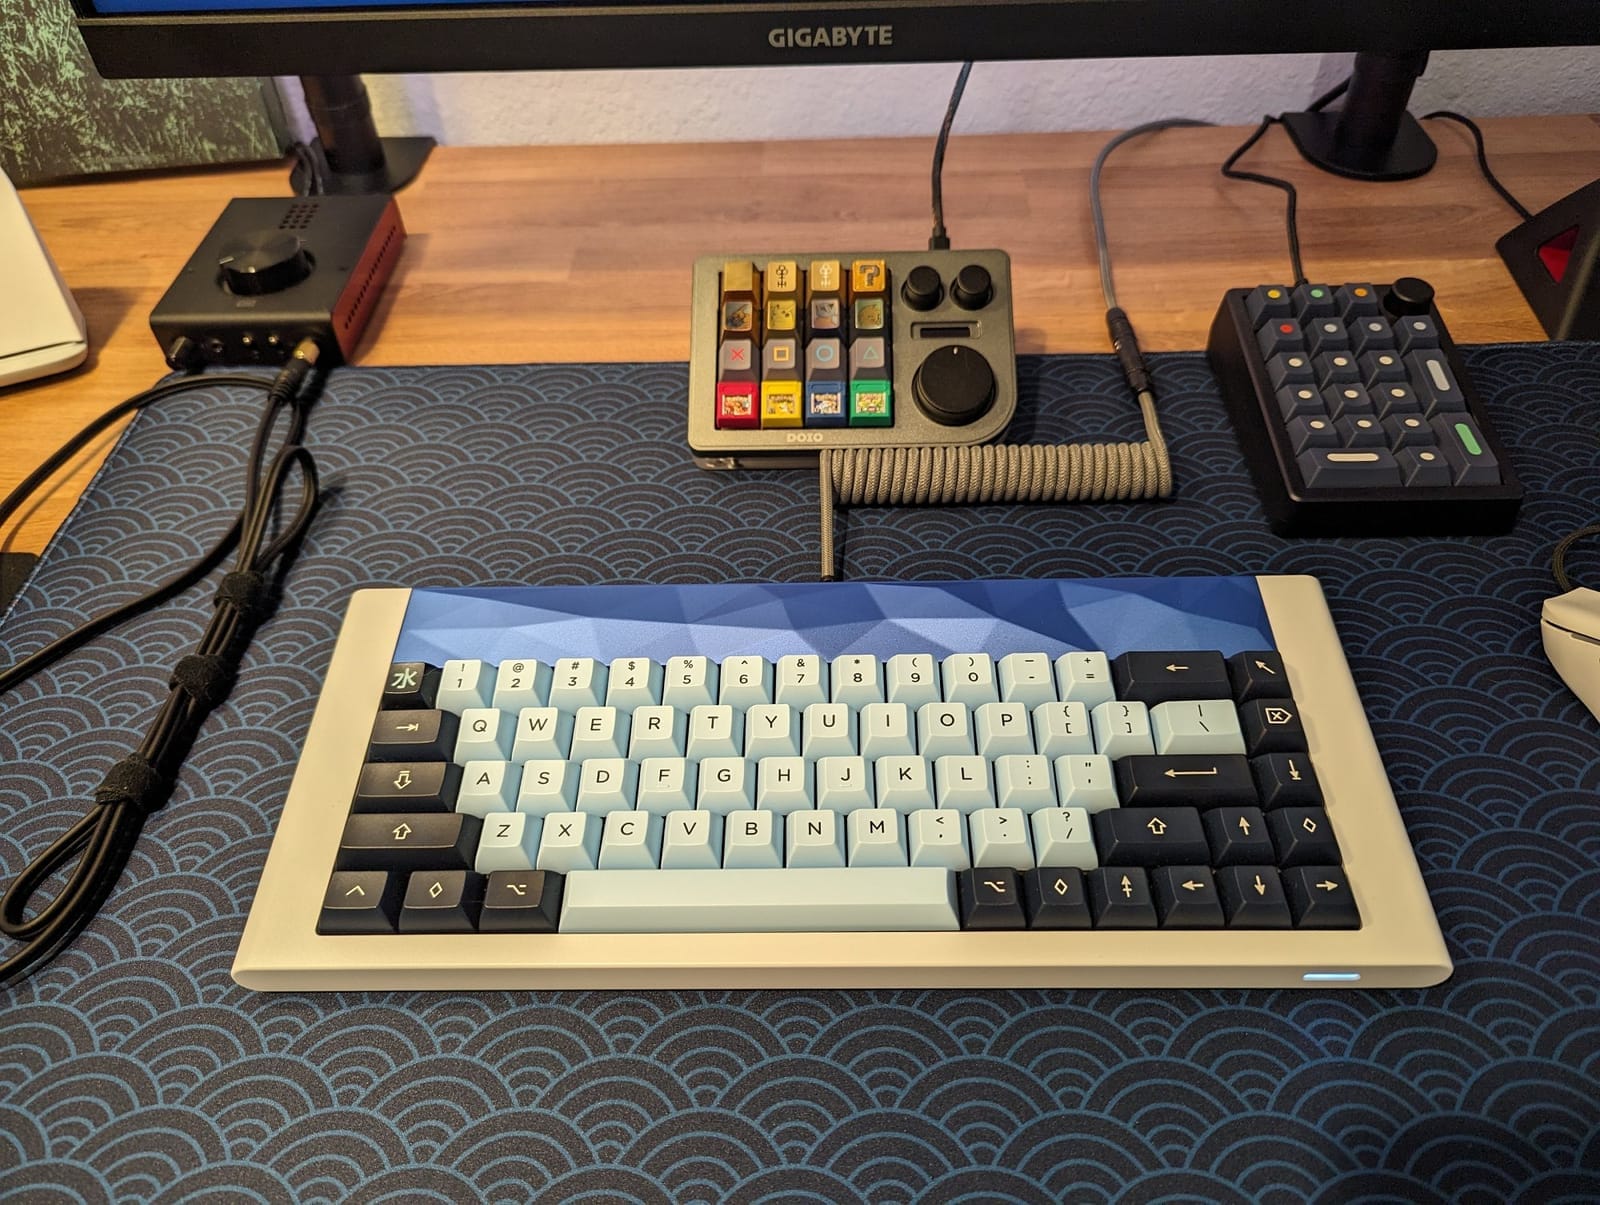 A neatly organised desk setup featuring a mechanical keyboard with grid 650 + KAT Mizu keycaps and Gazzew Boba U4T switches, dual monitors, headphones, a mouse, and various desk accessories